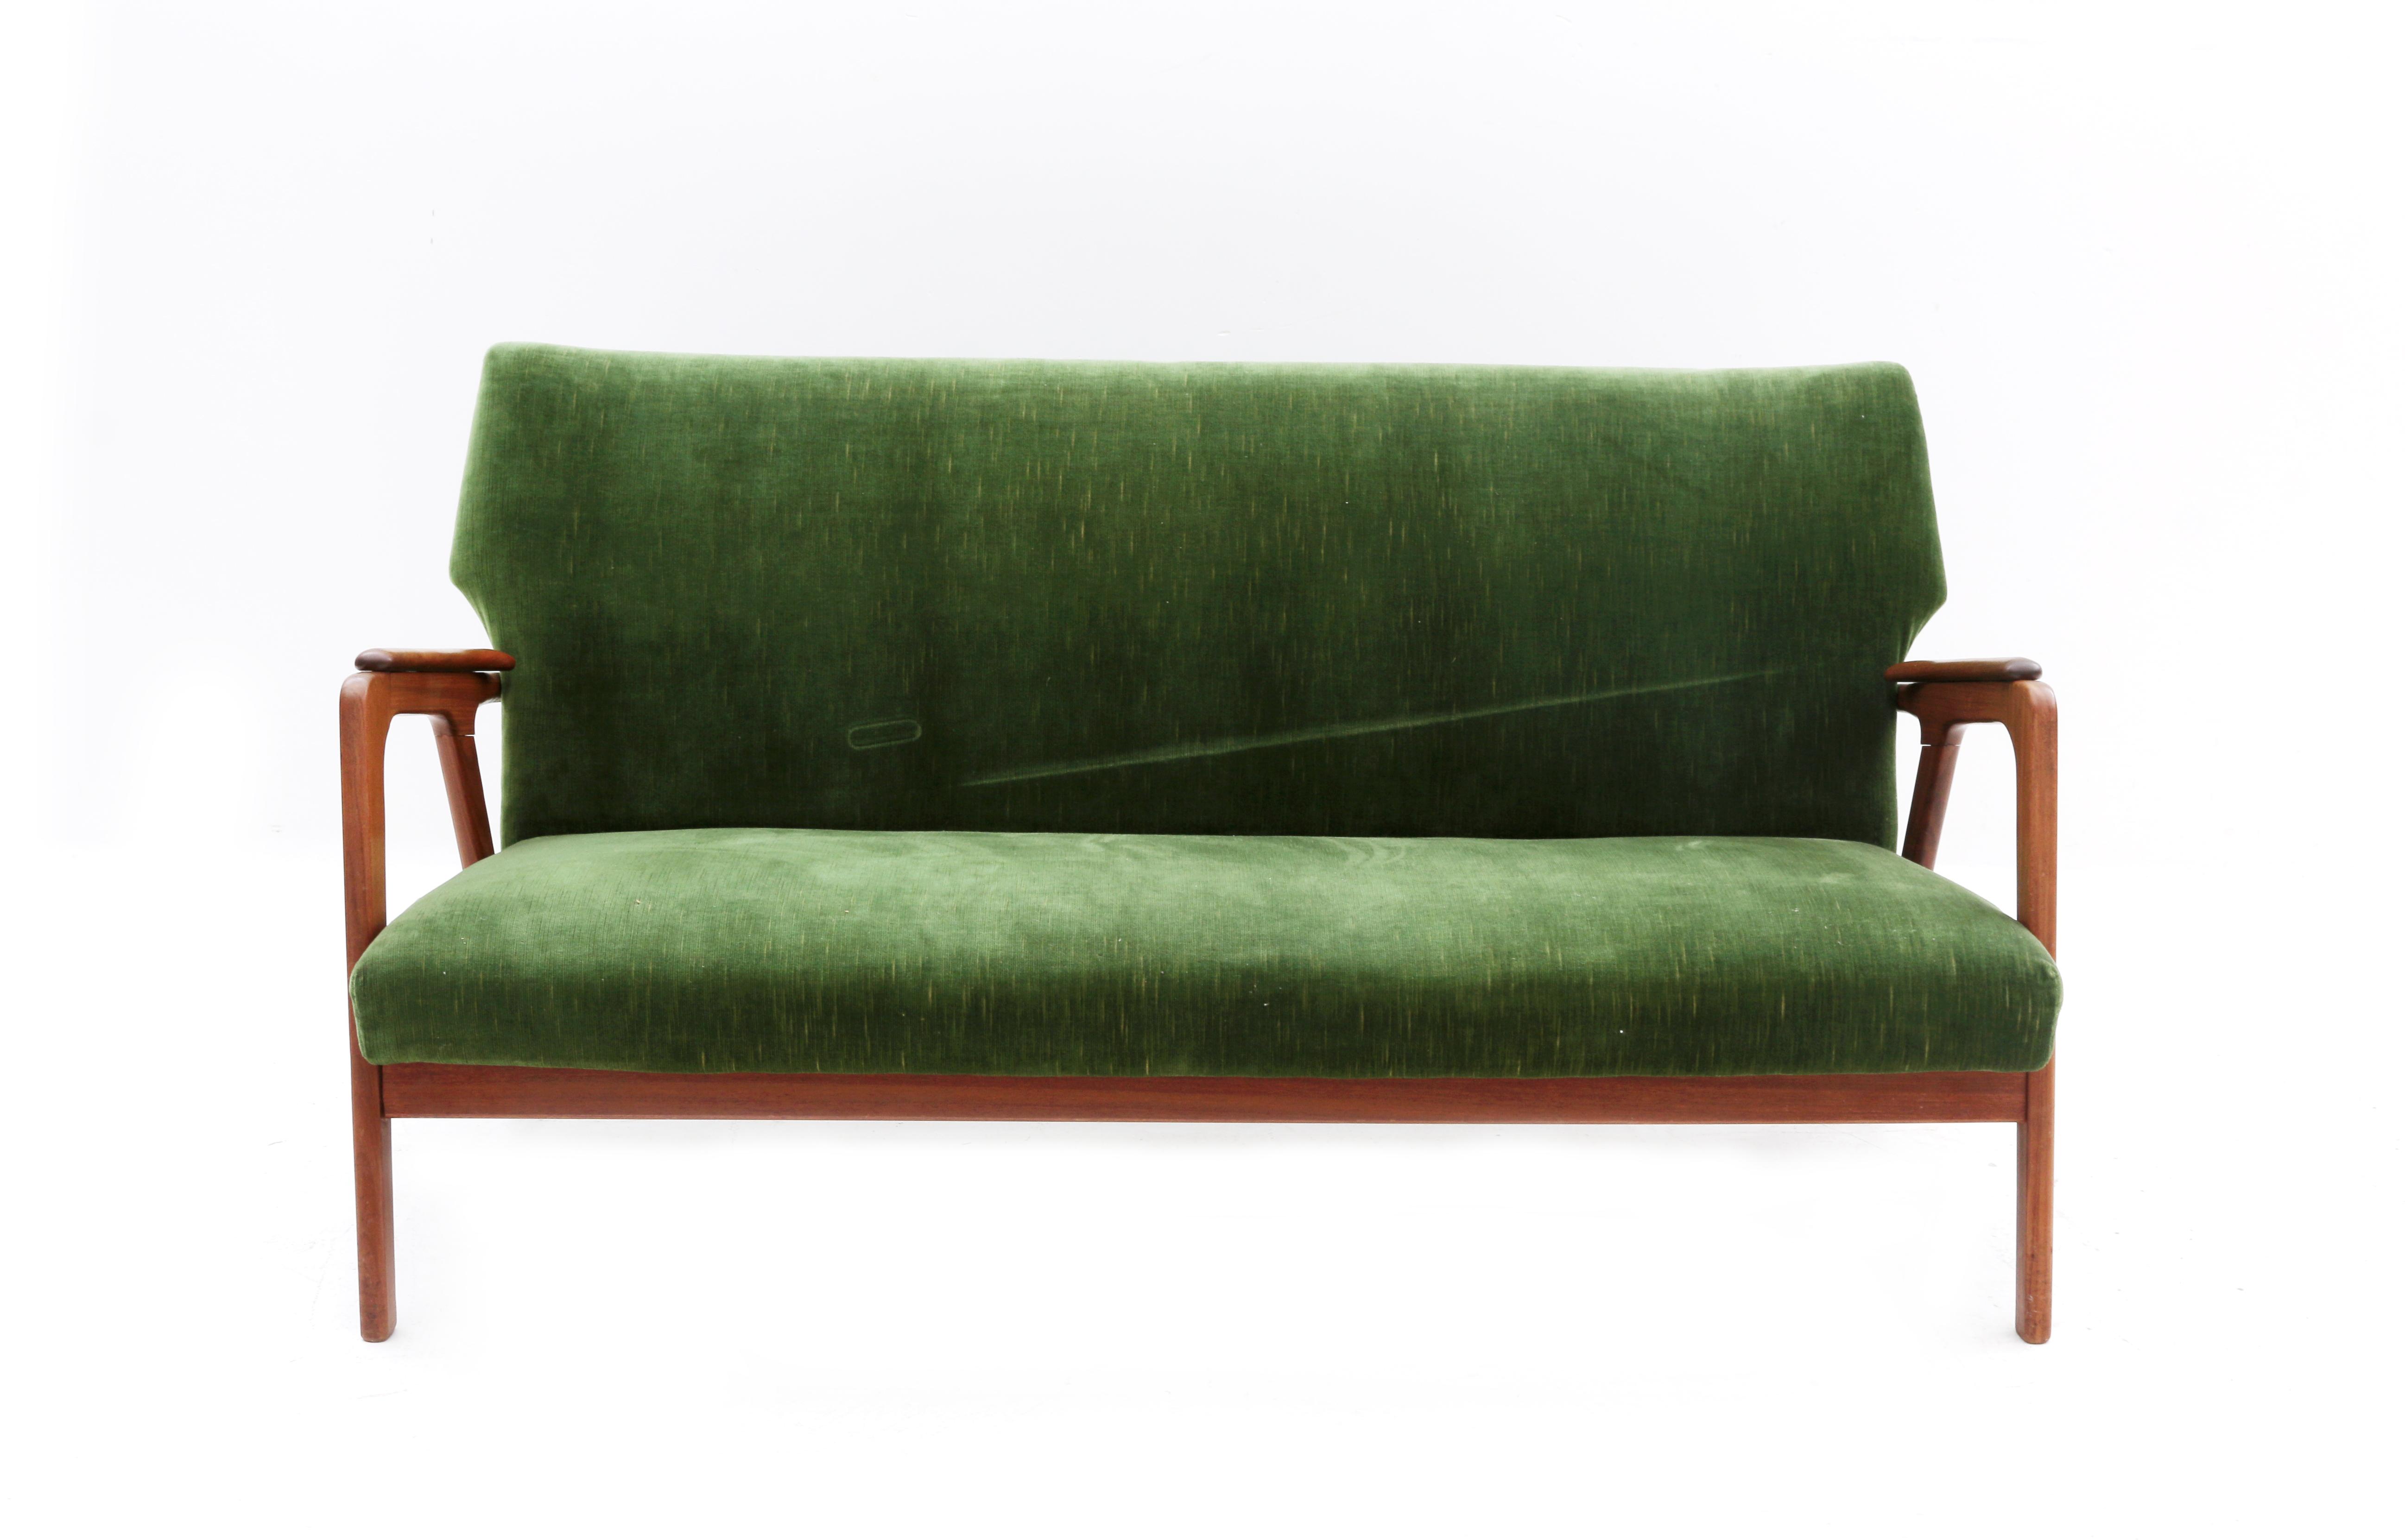 Midcentury Modern A teak sofa, the seat and backrest with green fabric upholstery, in the style of - Image 2 of 2